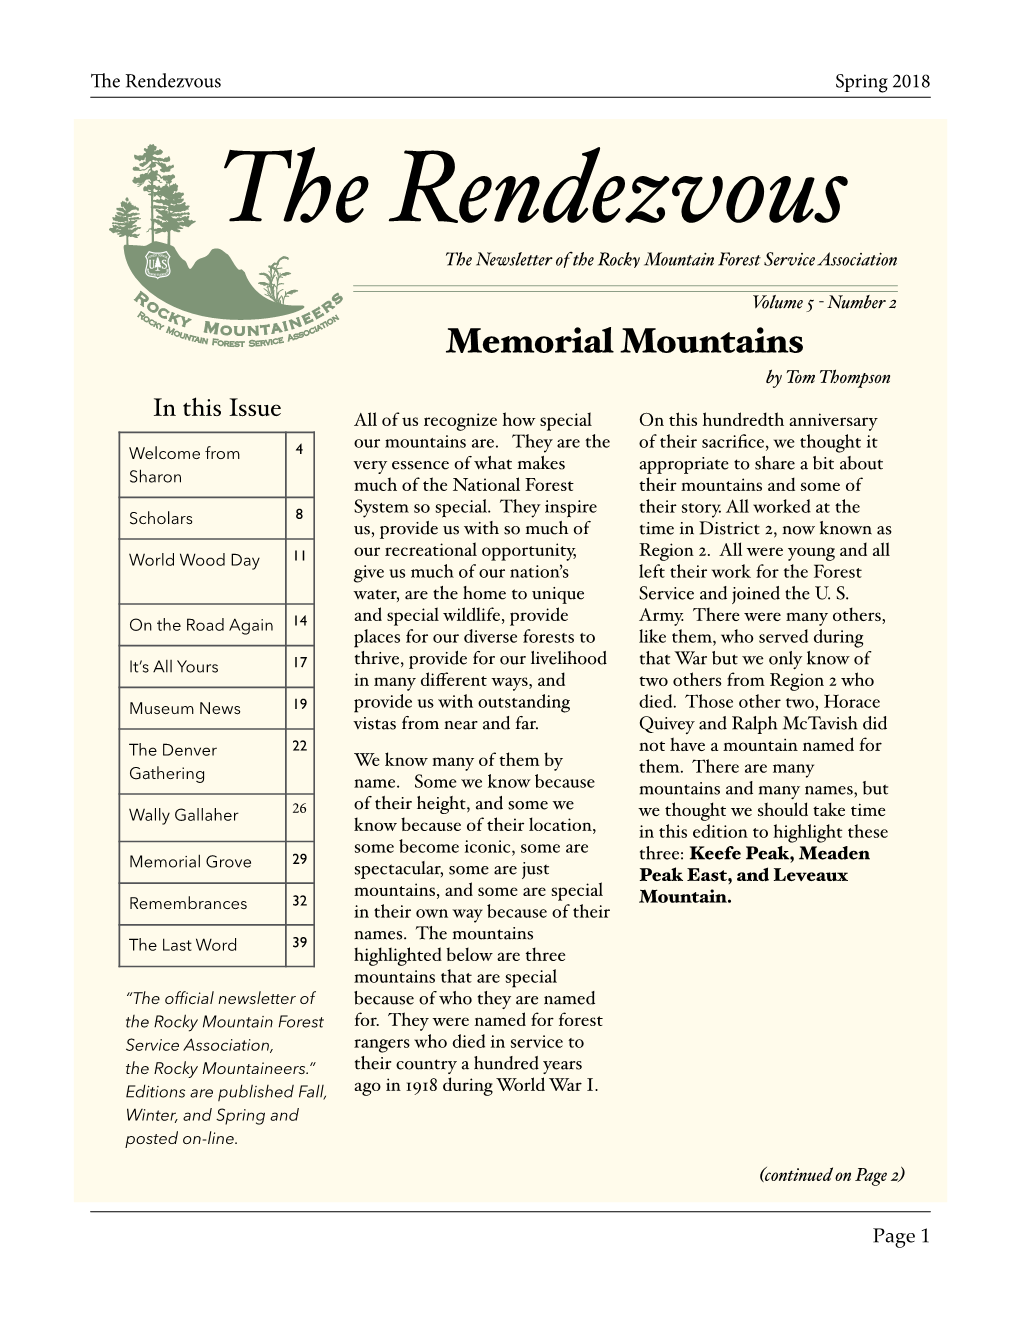 Spring 2018 Rendezvous FINAL